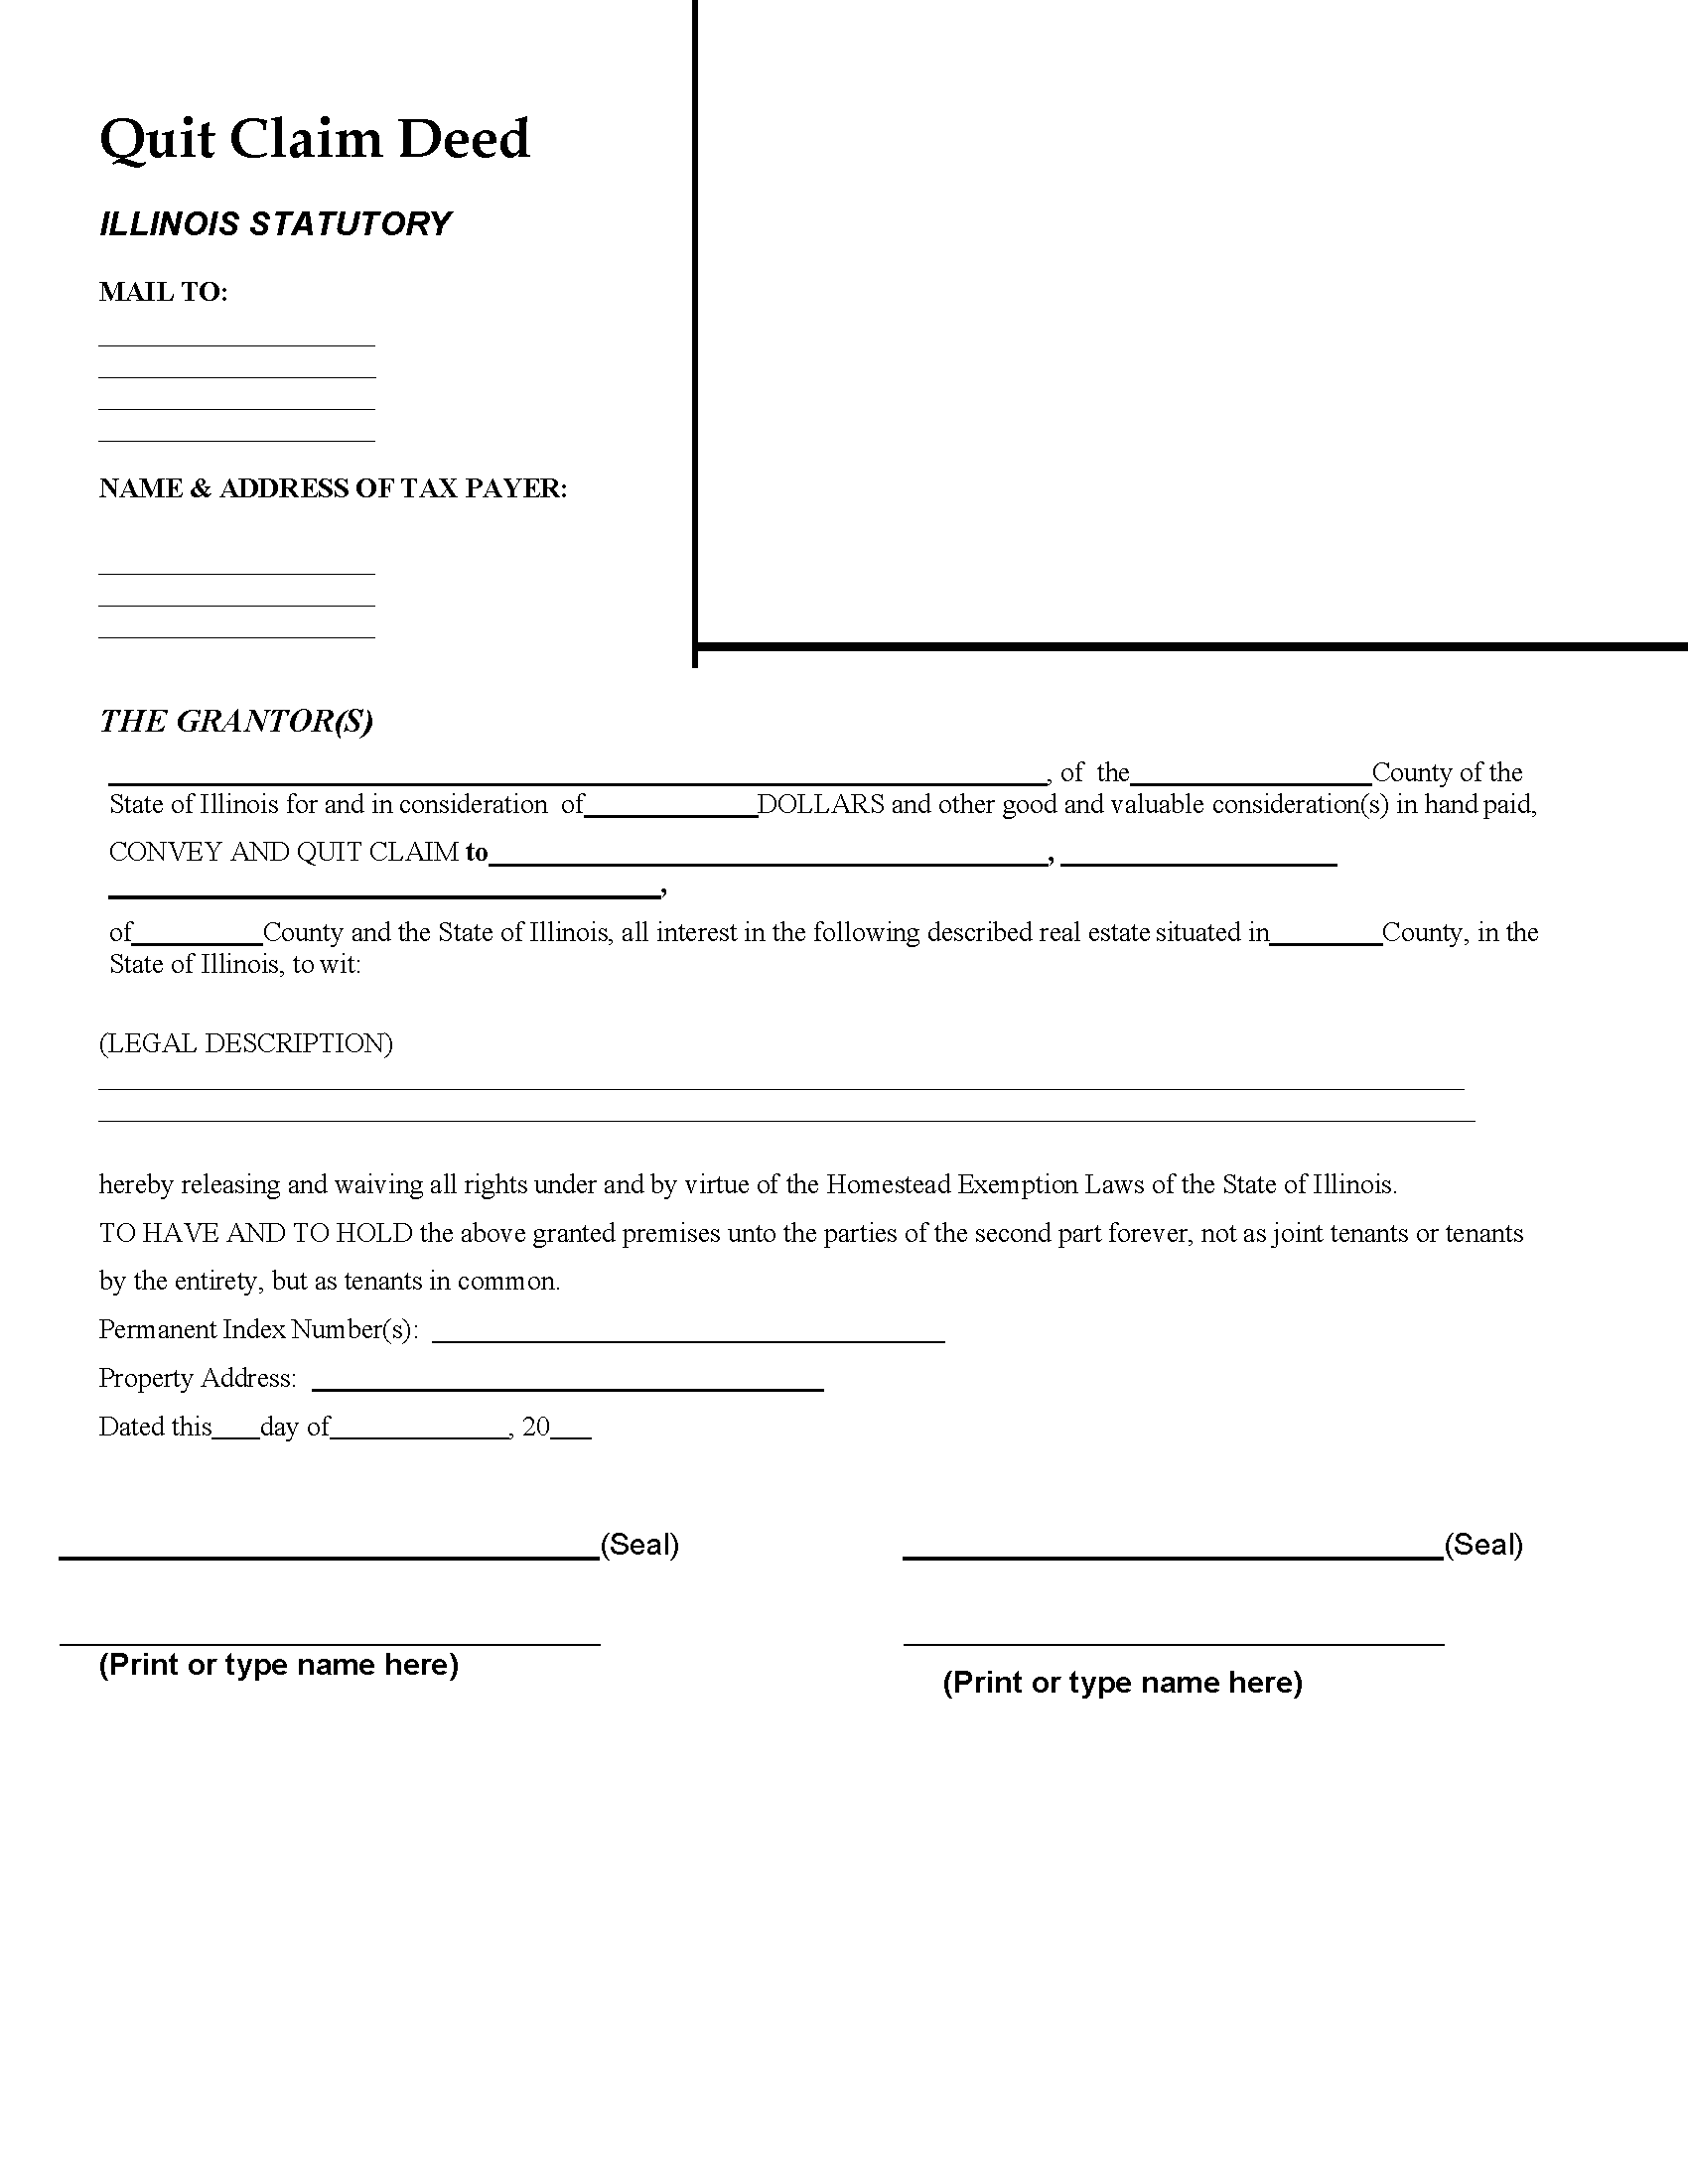 illinois-quitclaim-deed-form-2020-2021-fill-and-sign-printable-gambaran